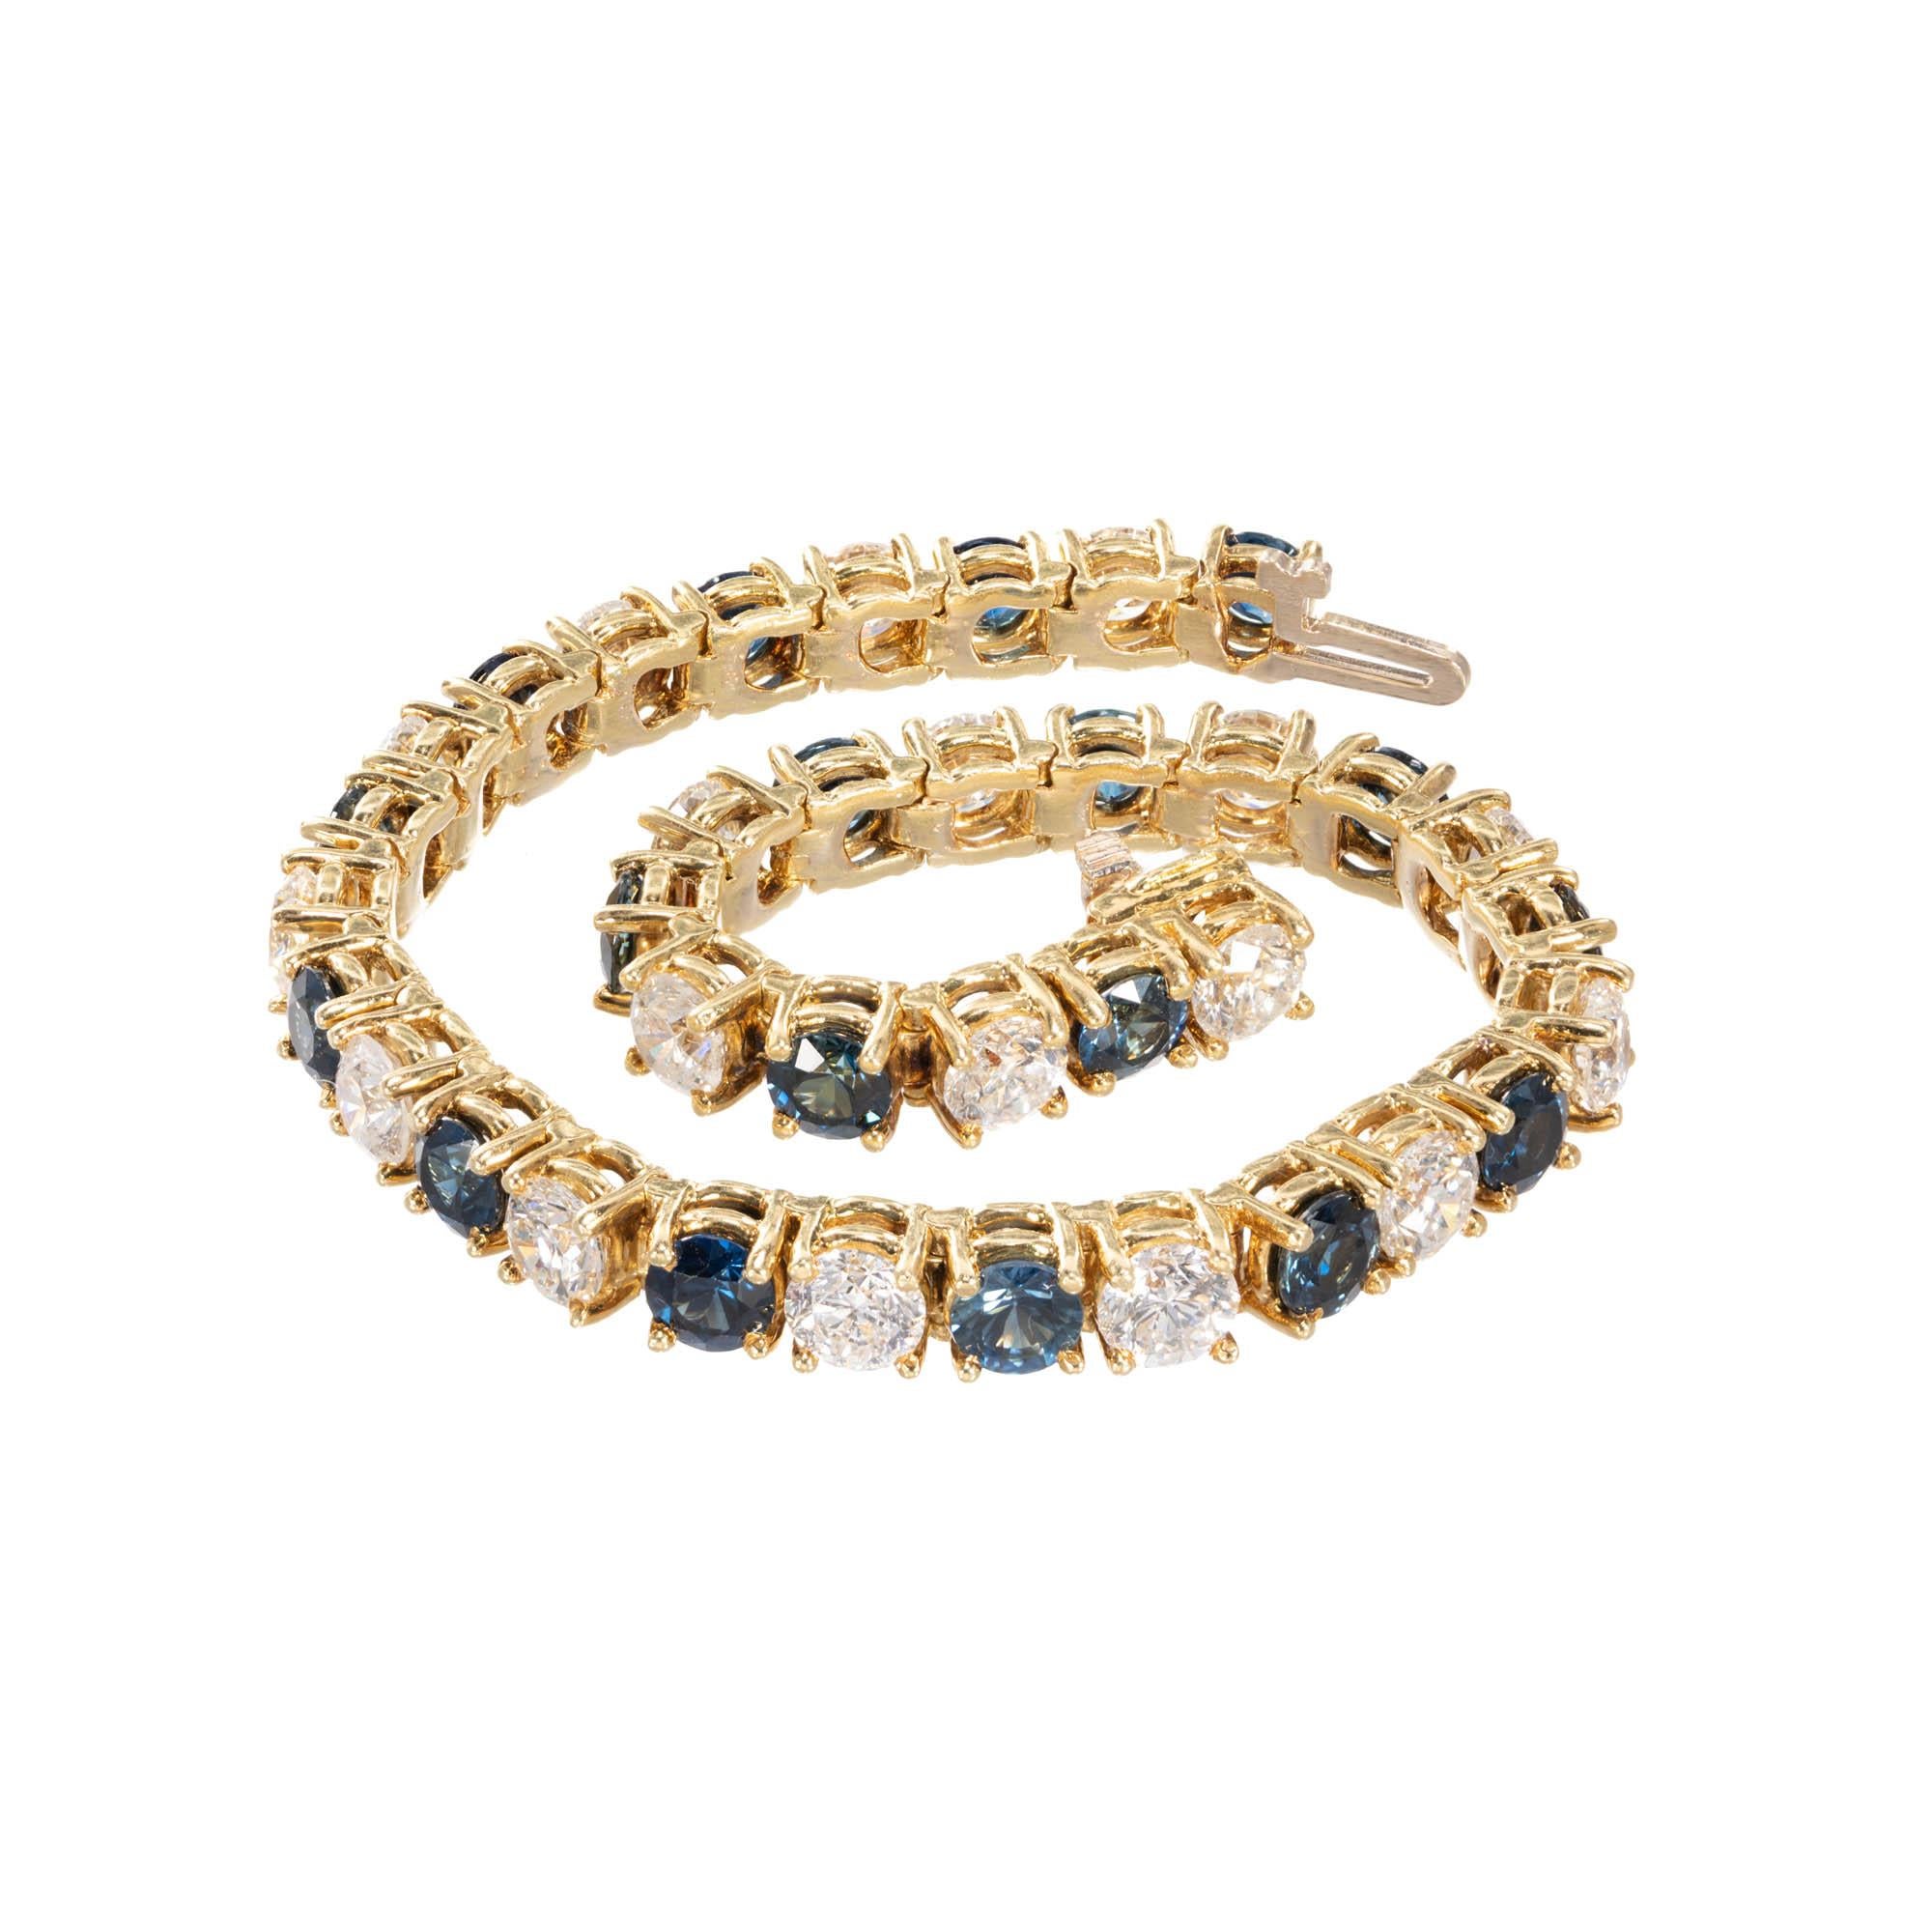 Hinged link sapphire and diamond 18k yellow gold bracelet alternating bright white diamonds and deep blue Sapphires. Hidden build in catch and underside safety.

18 round brilliant cut diamonds, approx. total weight 8.00cts, H, VS1
18 round bright